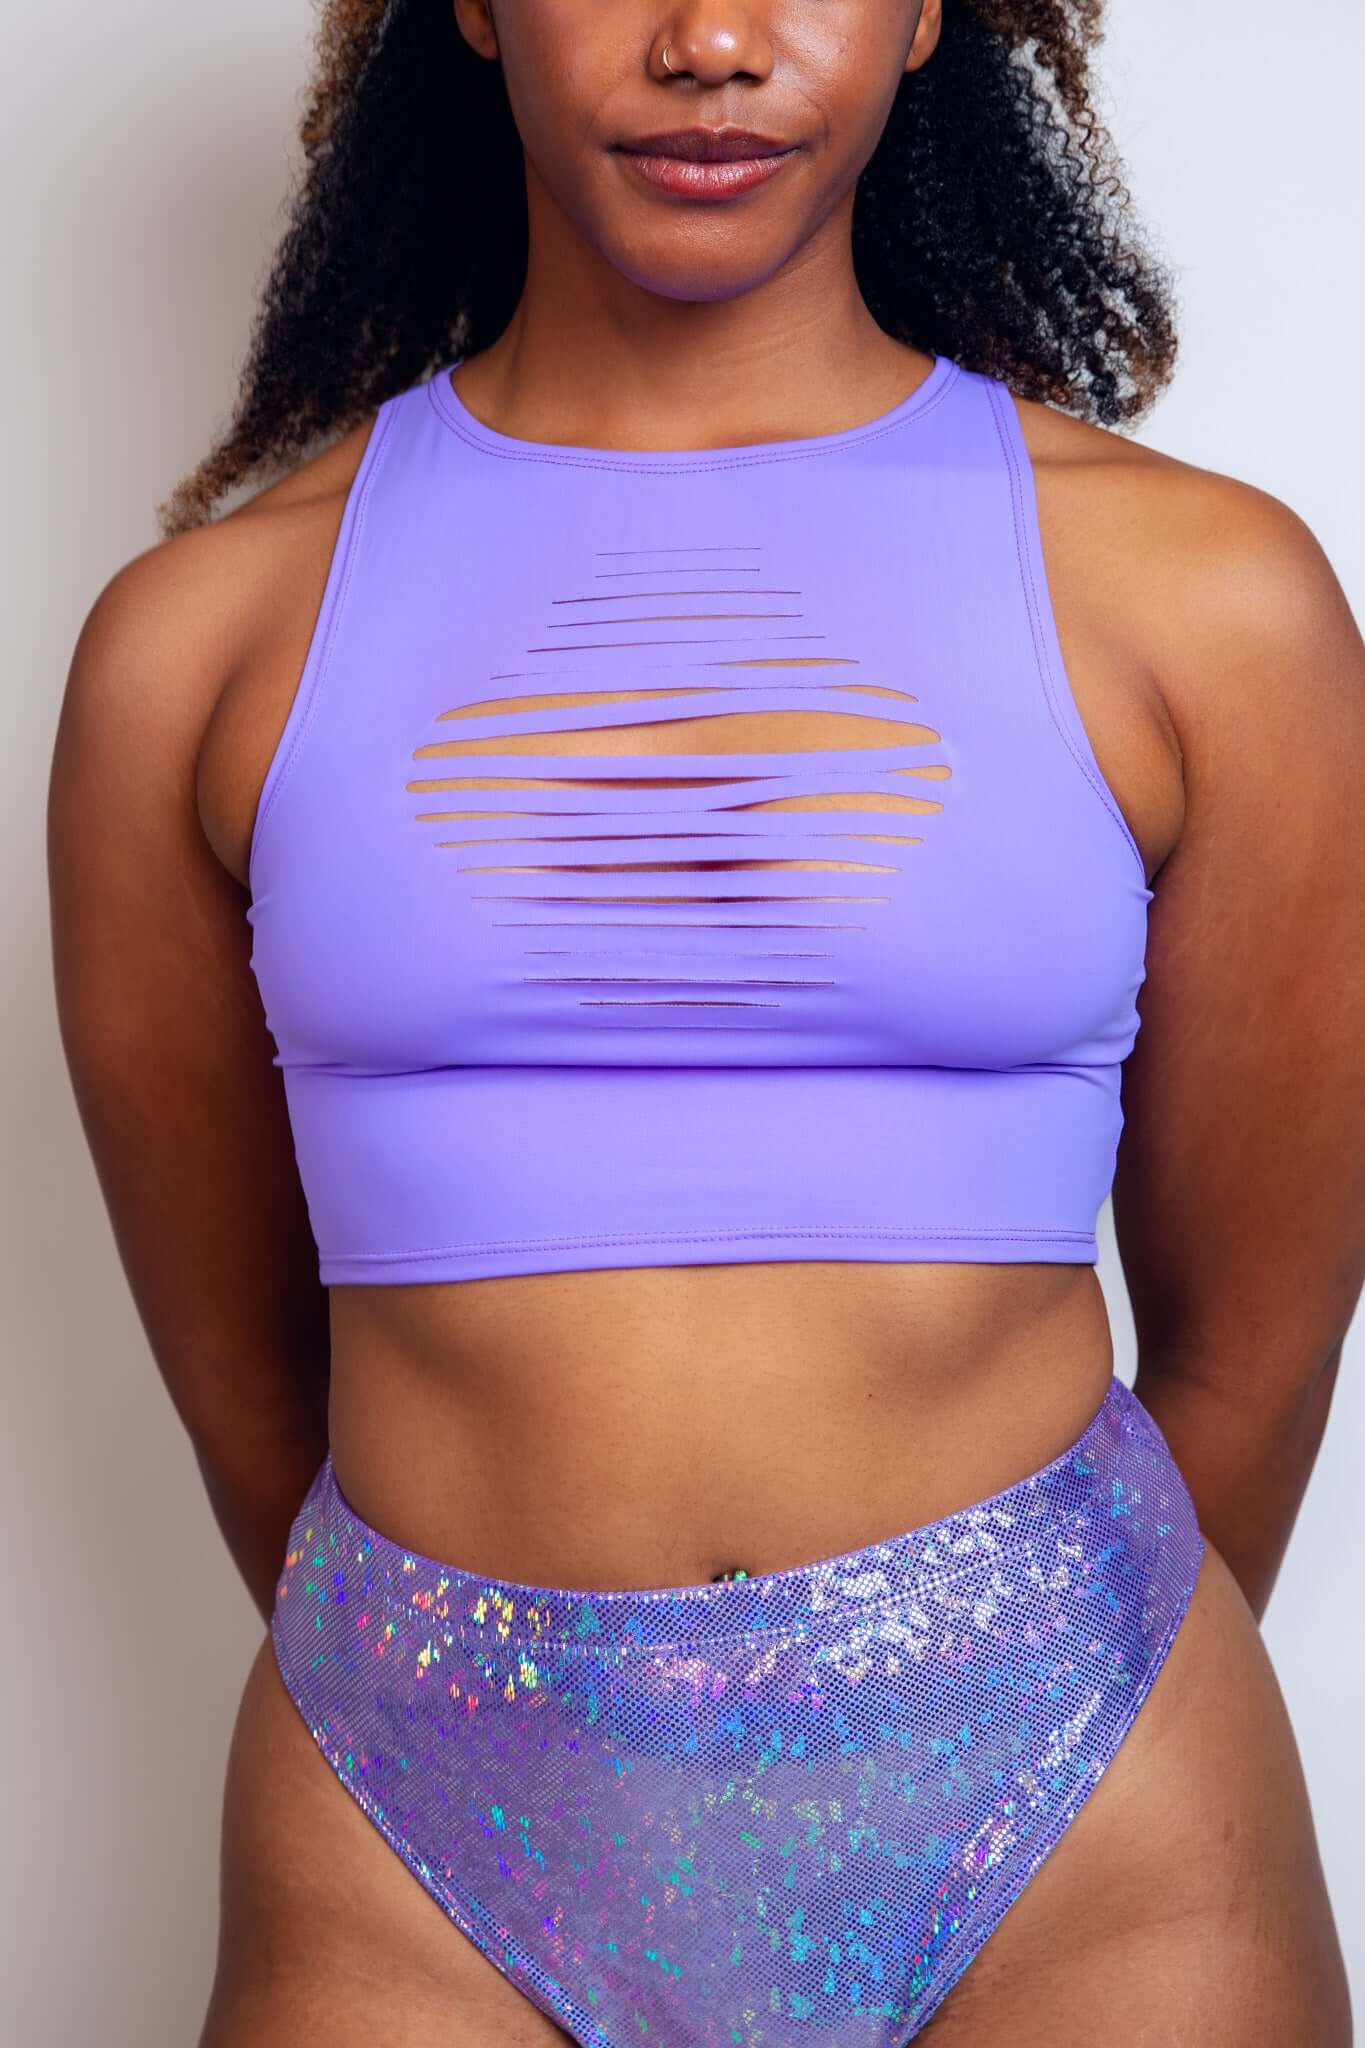 Confident woman in a lavender Freedom Rave Wear crop top with a distinctive front slit design and gold details, paired with a shimmering purple high-waist rave bottom